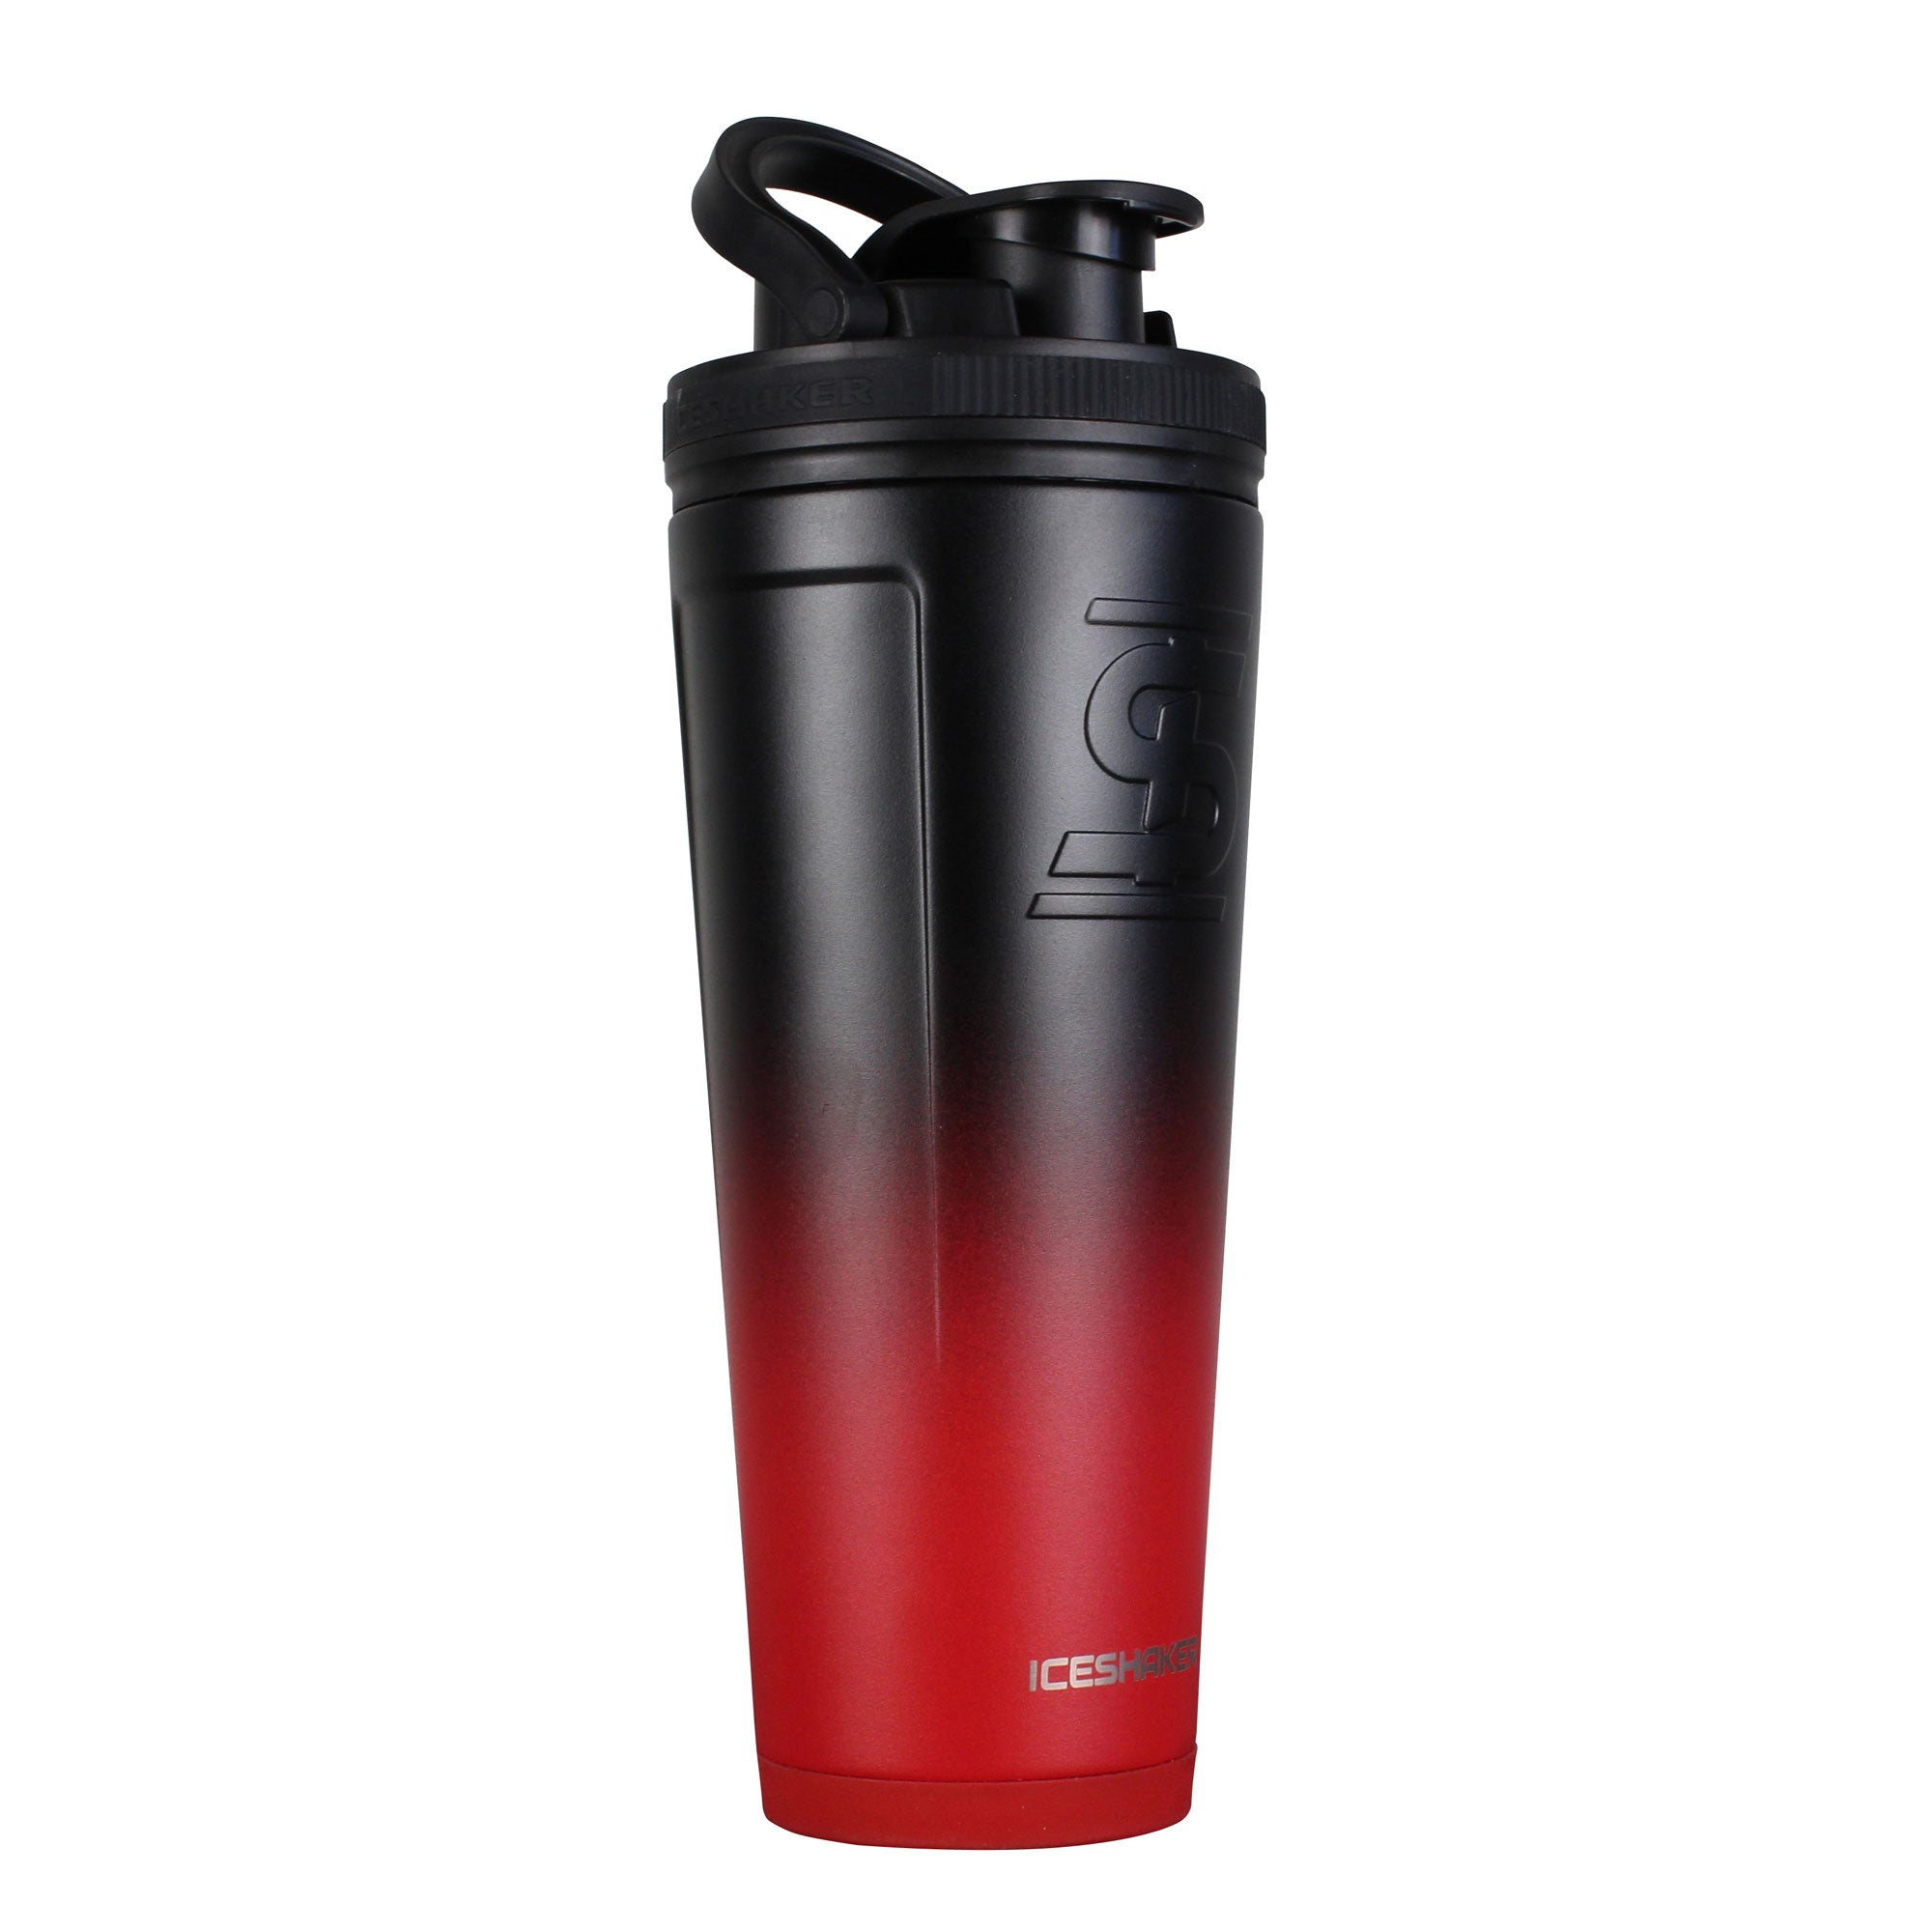 36oz Ice Shaker - Red Black Ombre